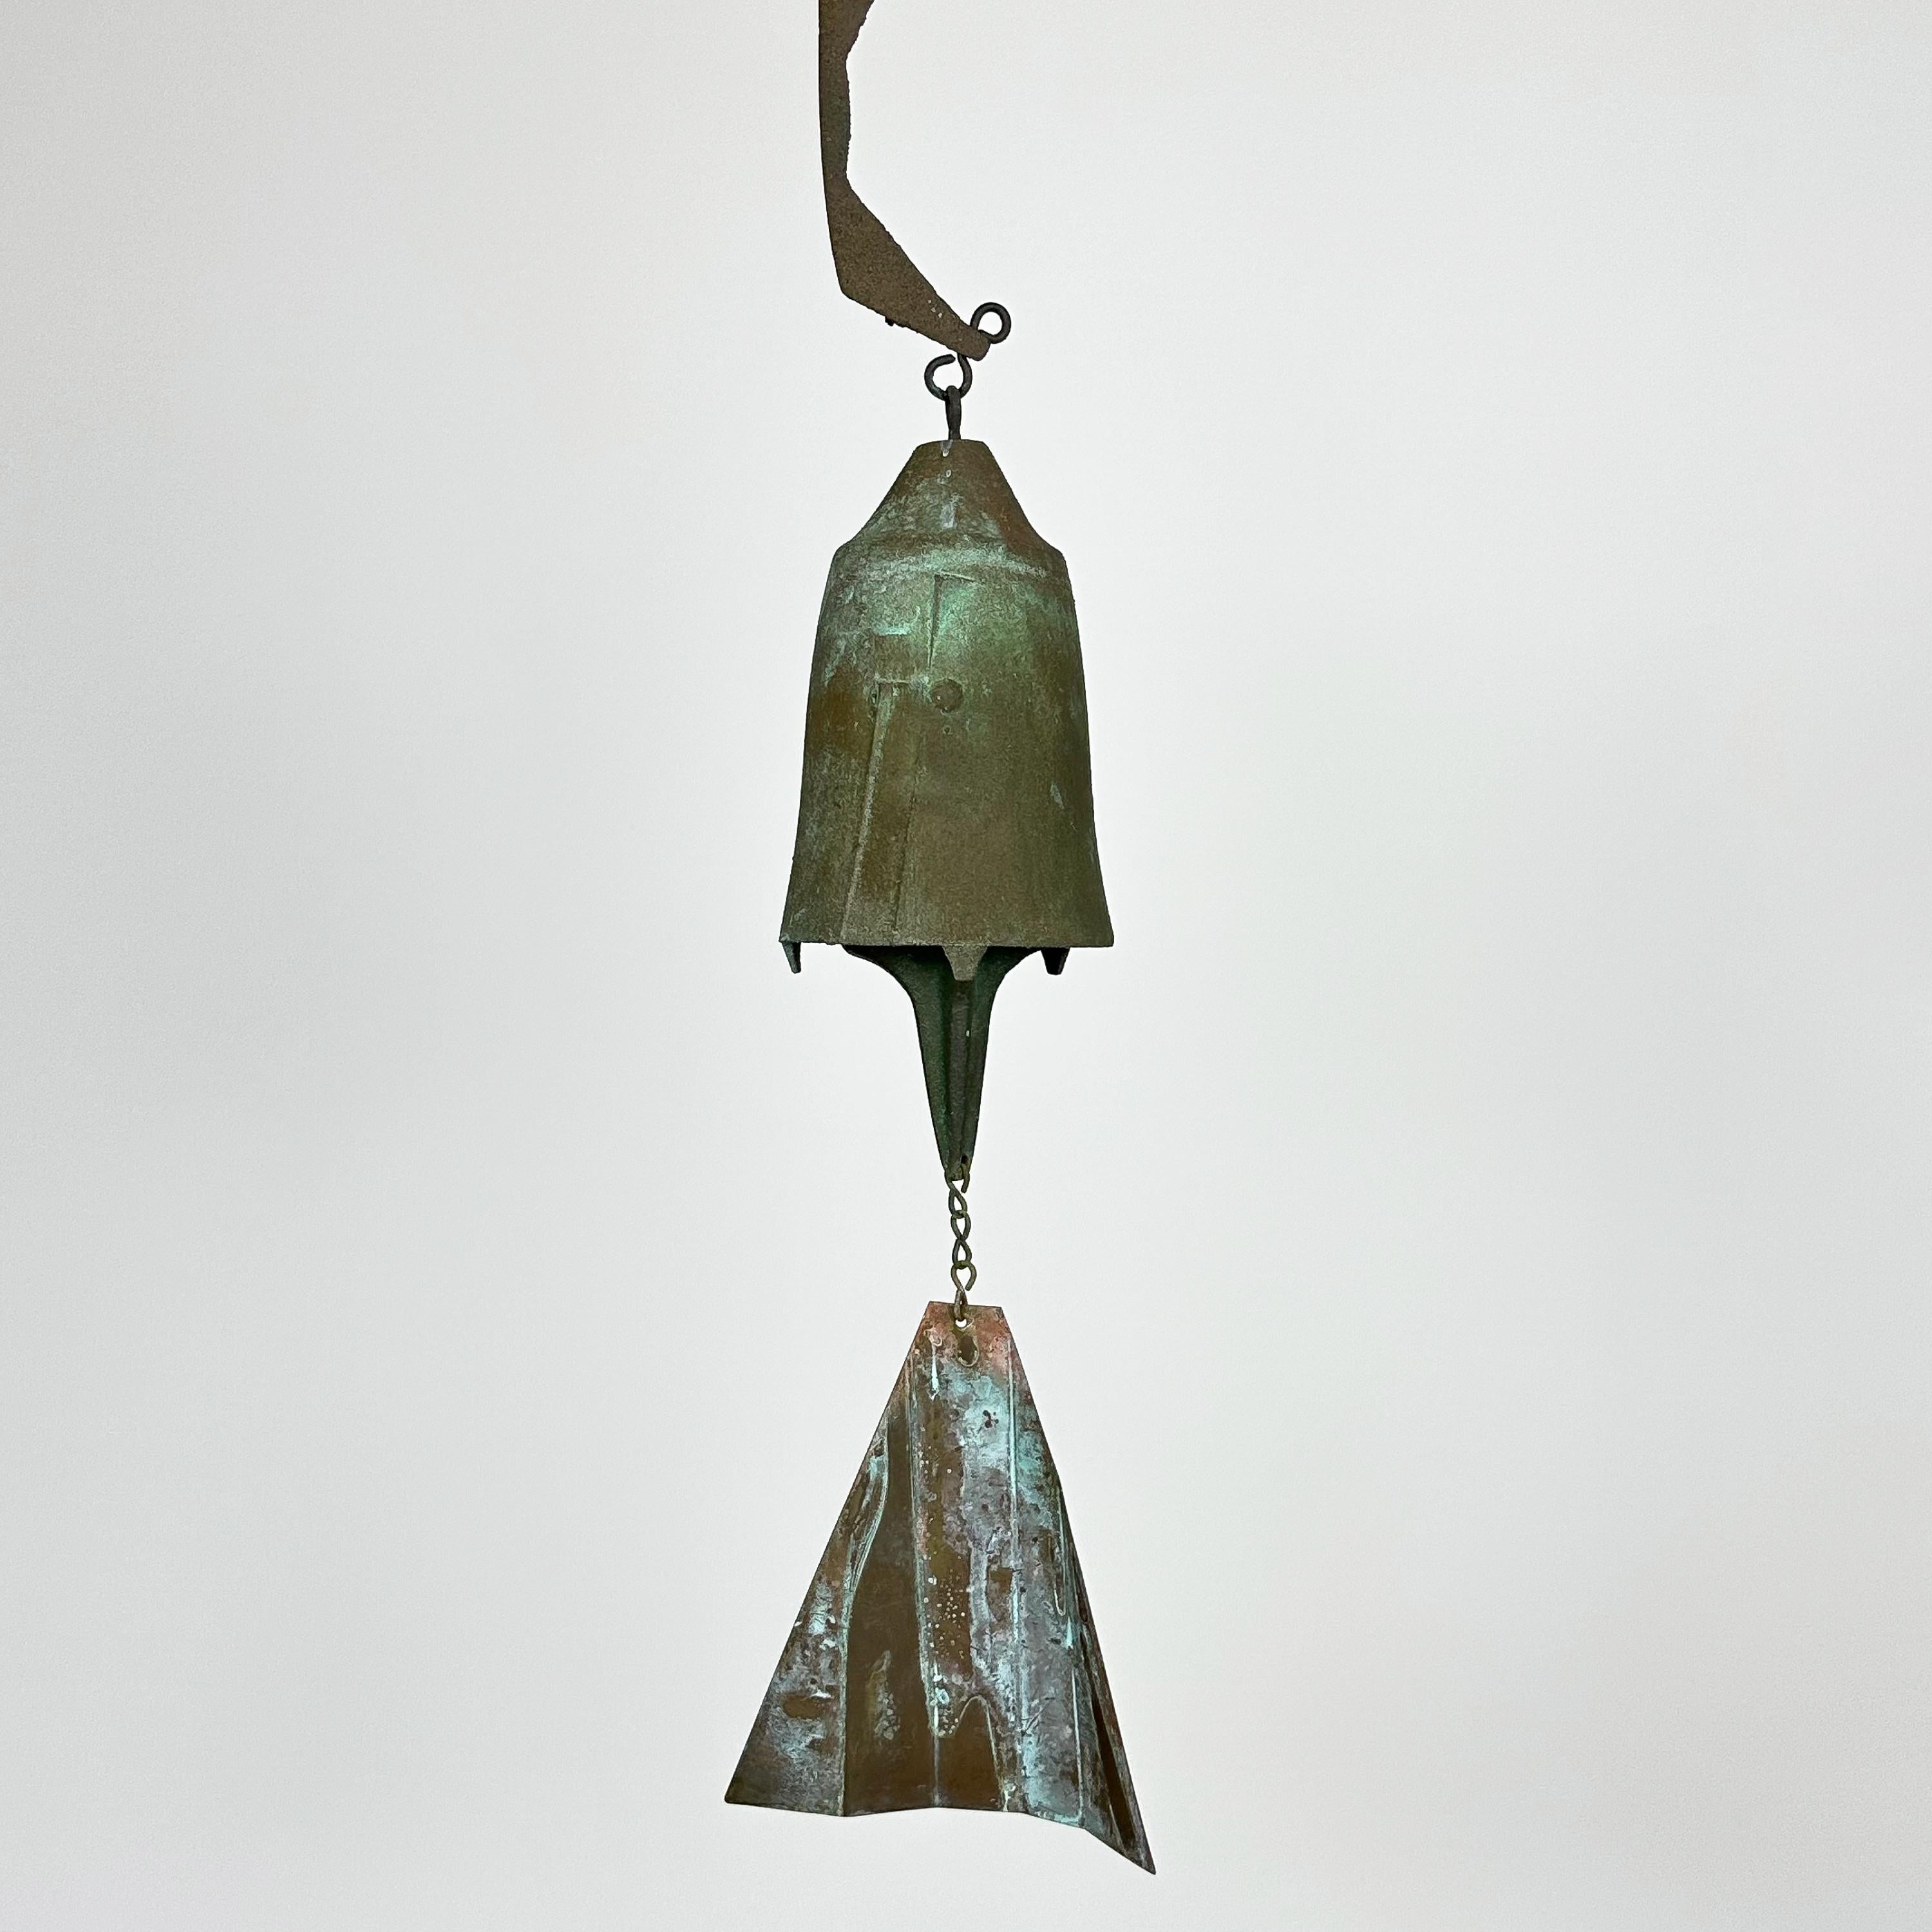 A vintage Brutalist bronze bell / wind chime designed by architect, Paolo Soleri for Arcosanti , circa 1970s. This gorgeous cast solid bronze Soleri bell features a beautiful patina, abstract design on the bell and two-part S shaped hinged bronze